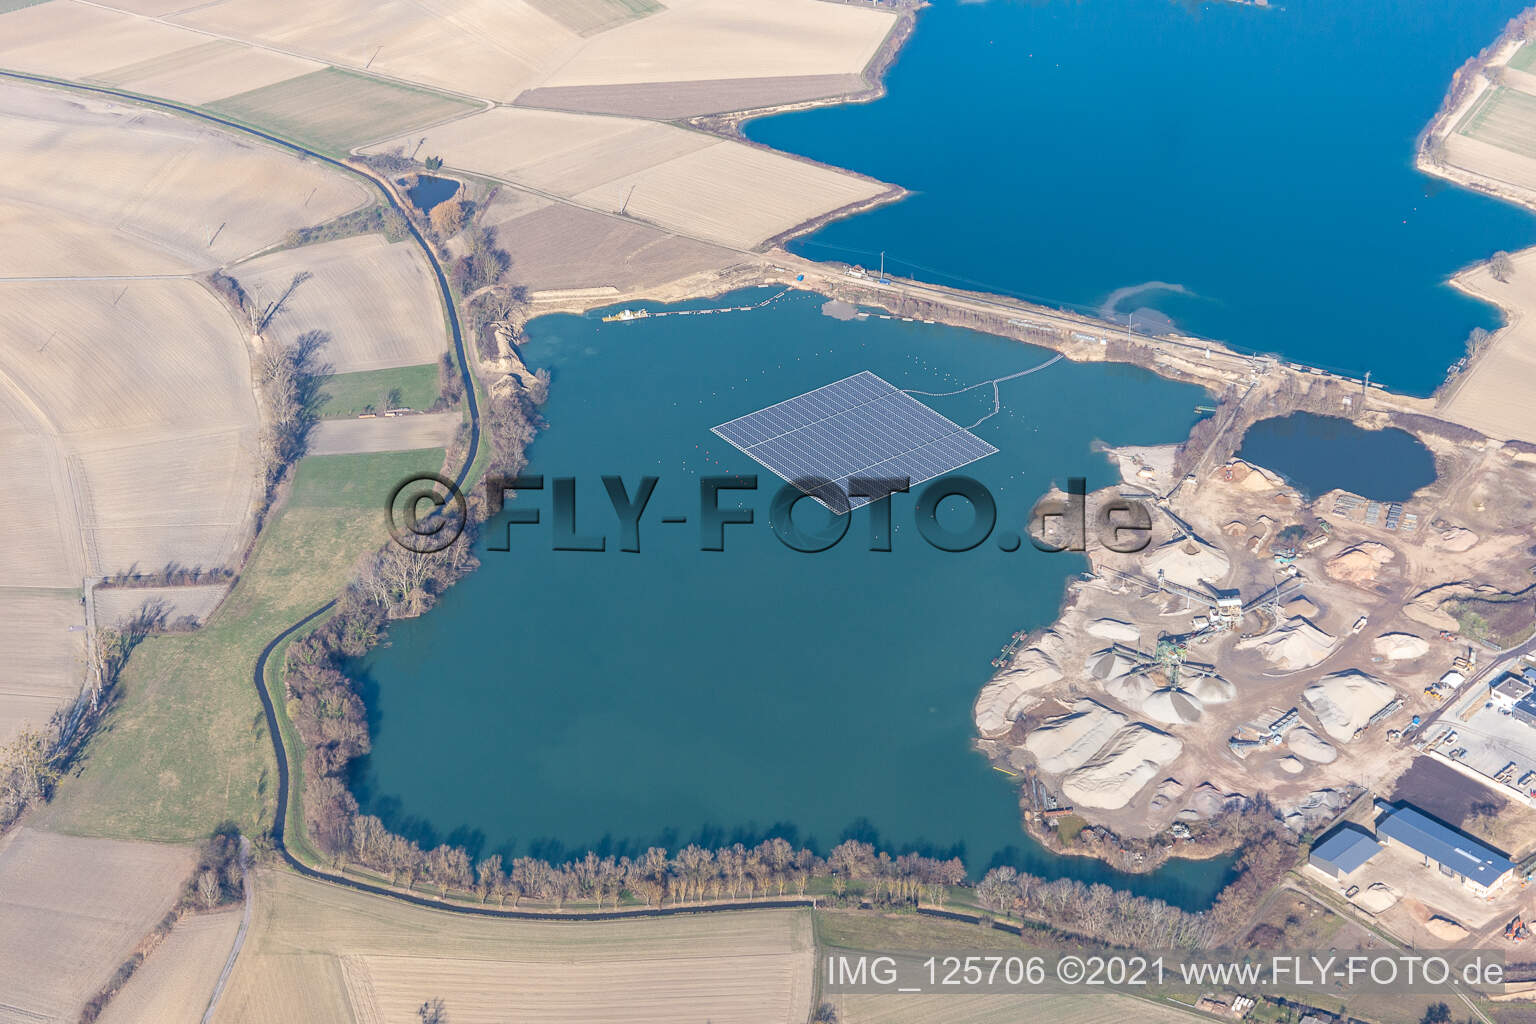 Floating photovoltaic system on the quarry lake of the Markus Wolf gravel works in Leimersheim in the state Rhineland-Palatinate, Germany